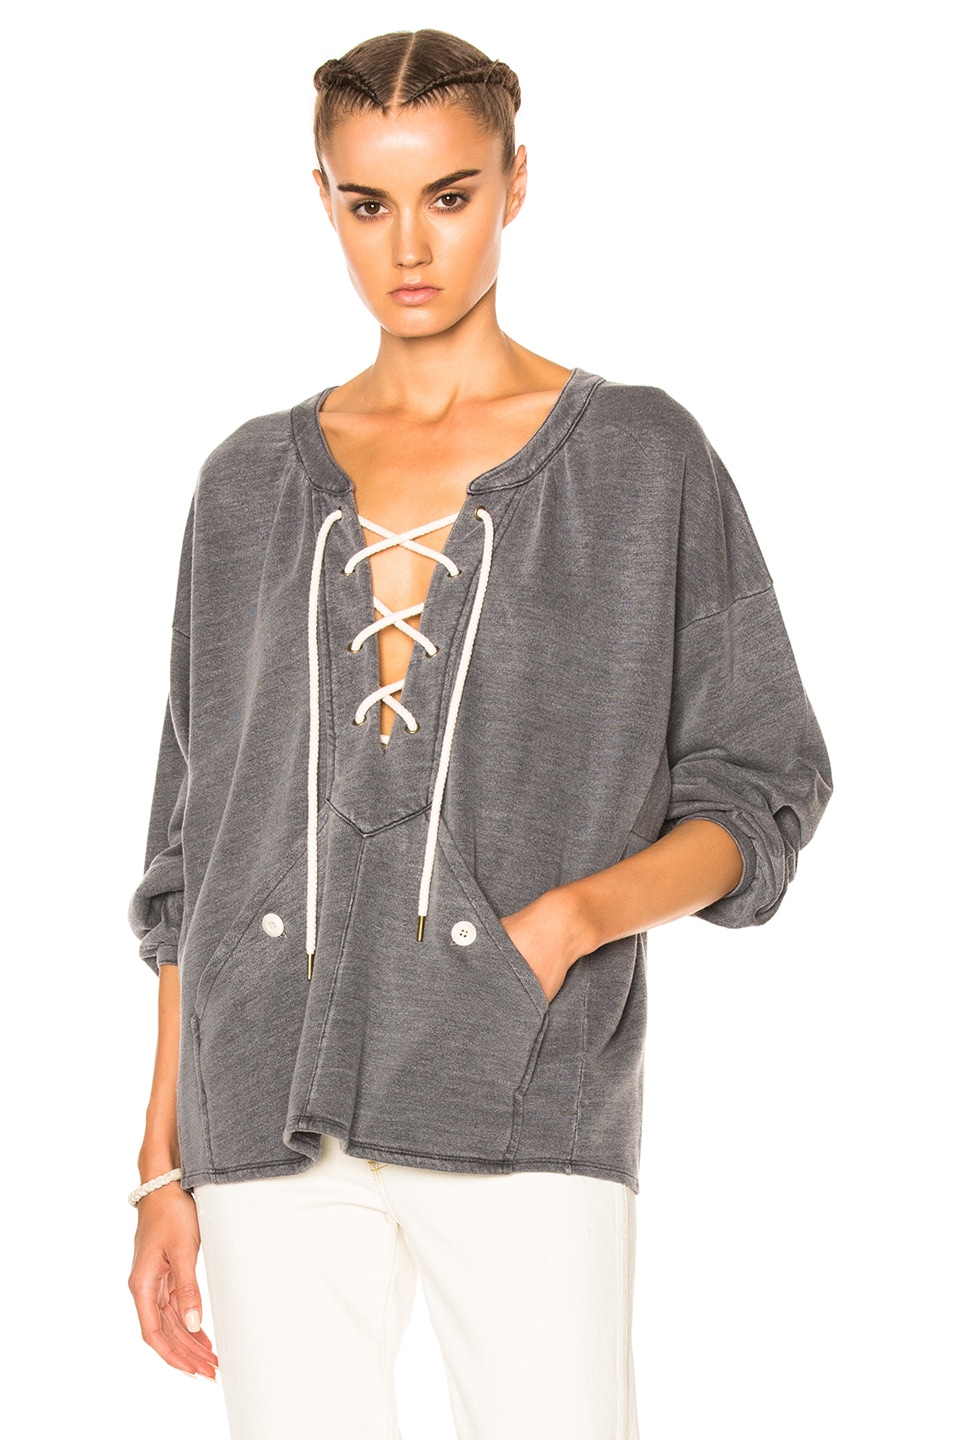 Image 1 of The Great Rope Pullover Sweatshirt in Charcoal Heather Grey